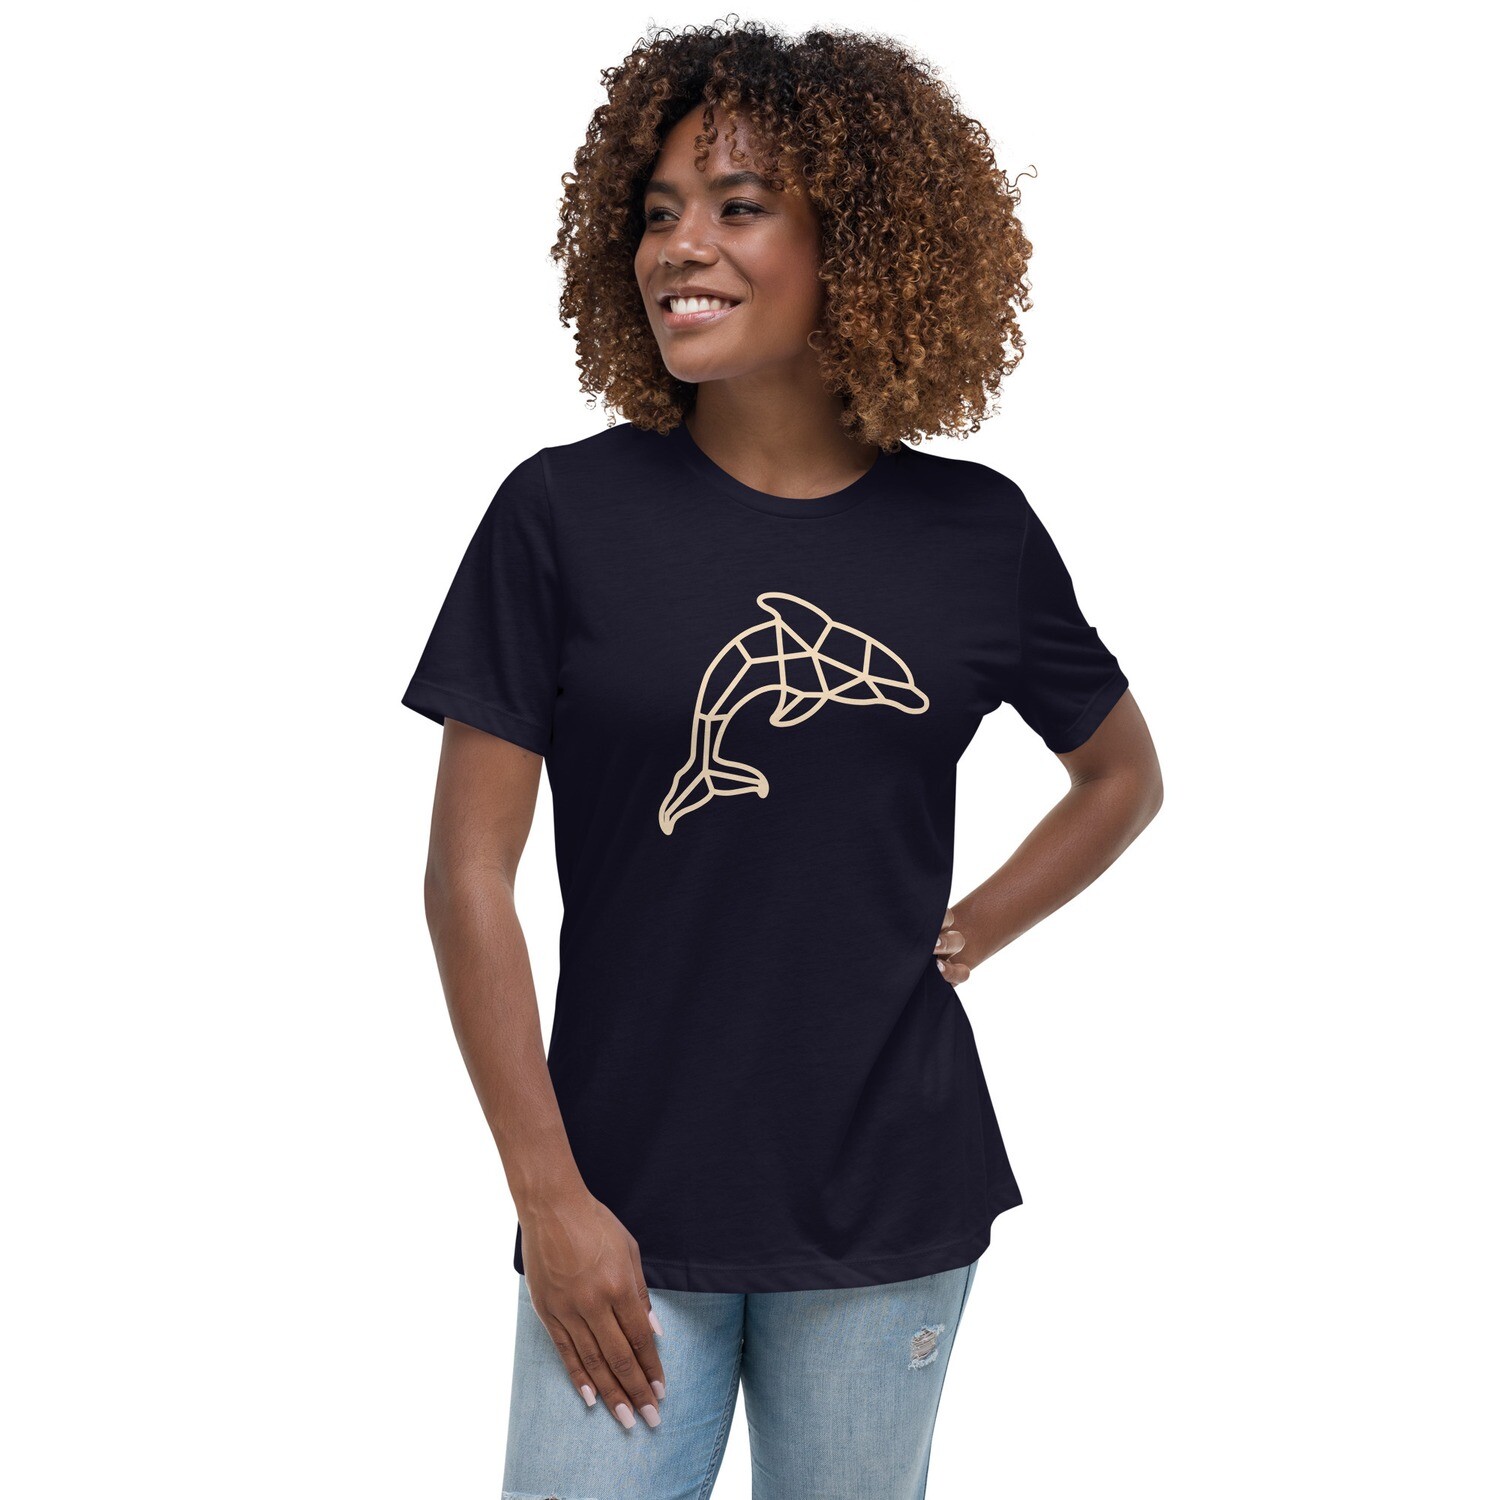 Fragmented Dolphin Women's Tee